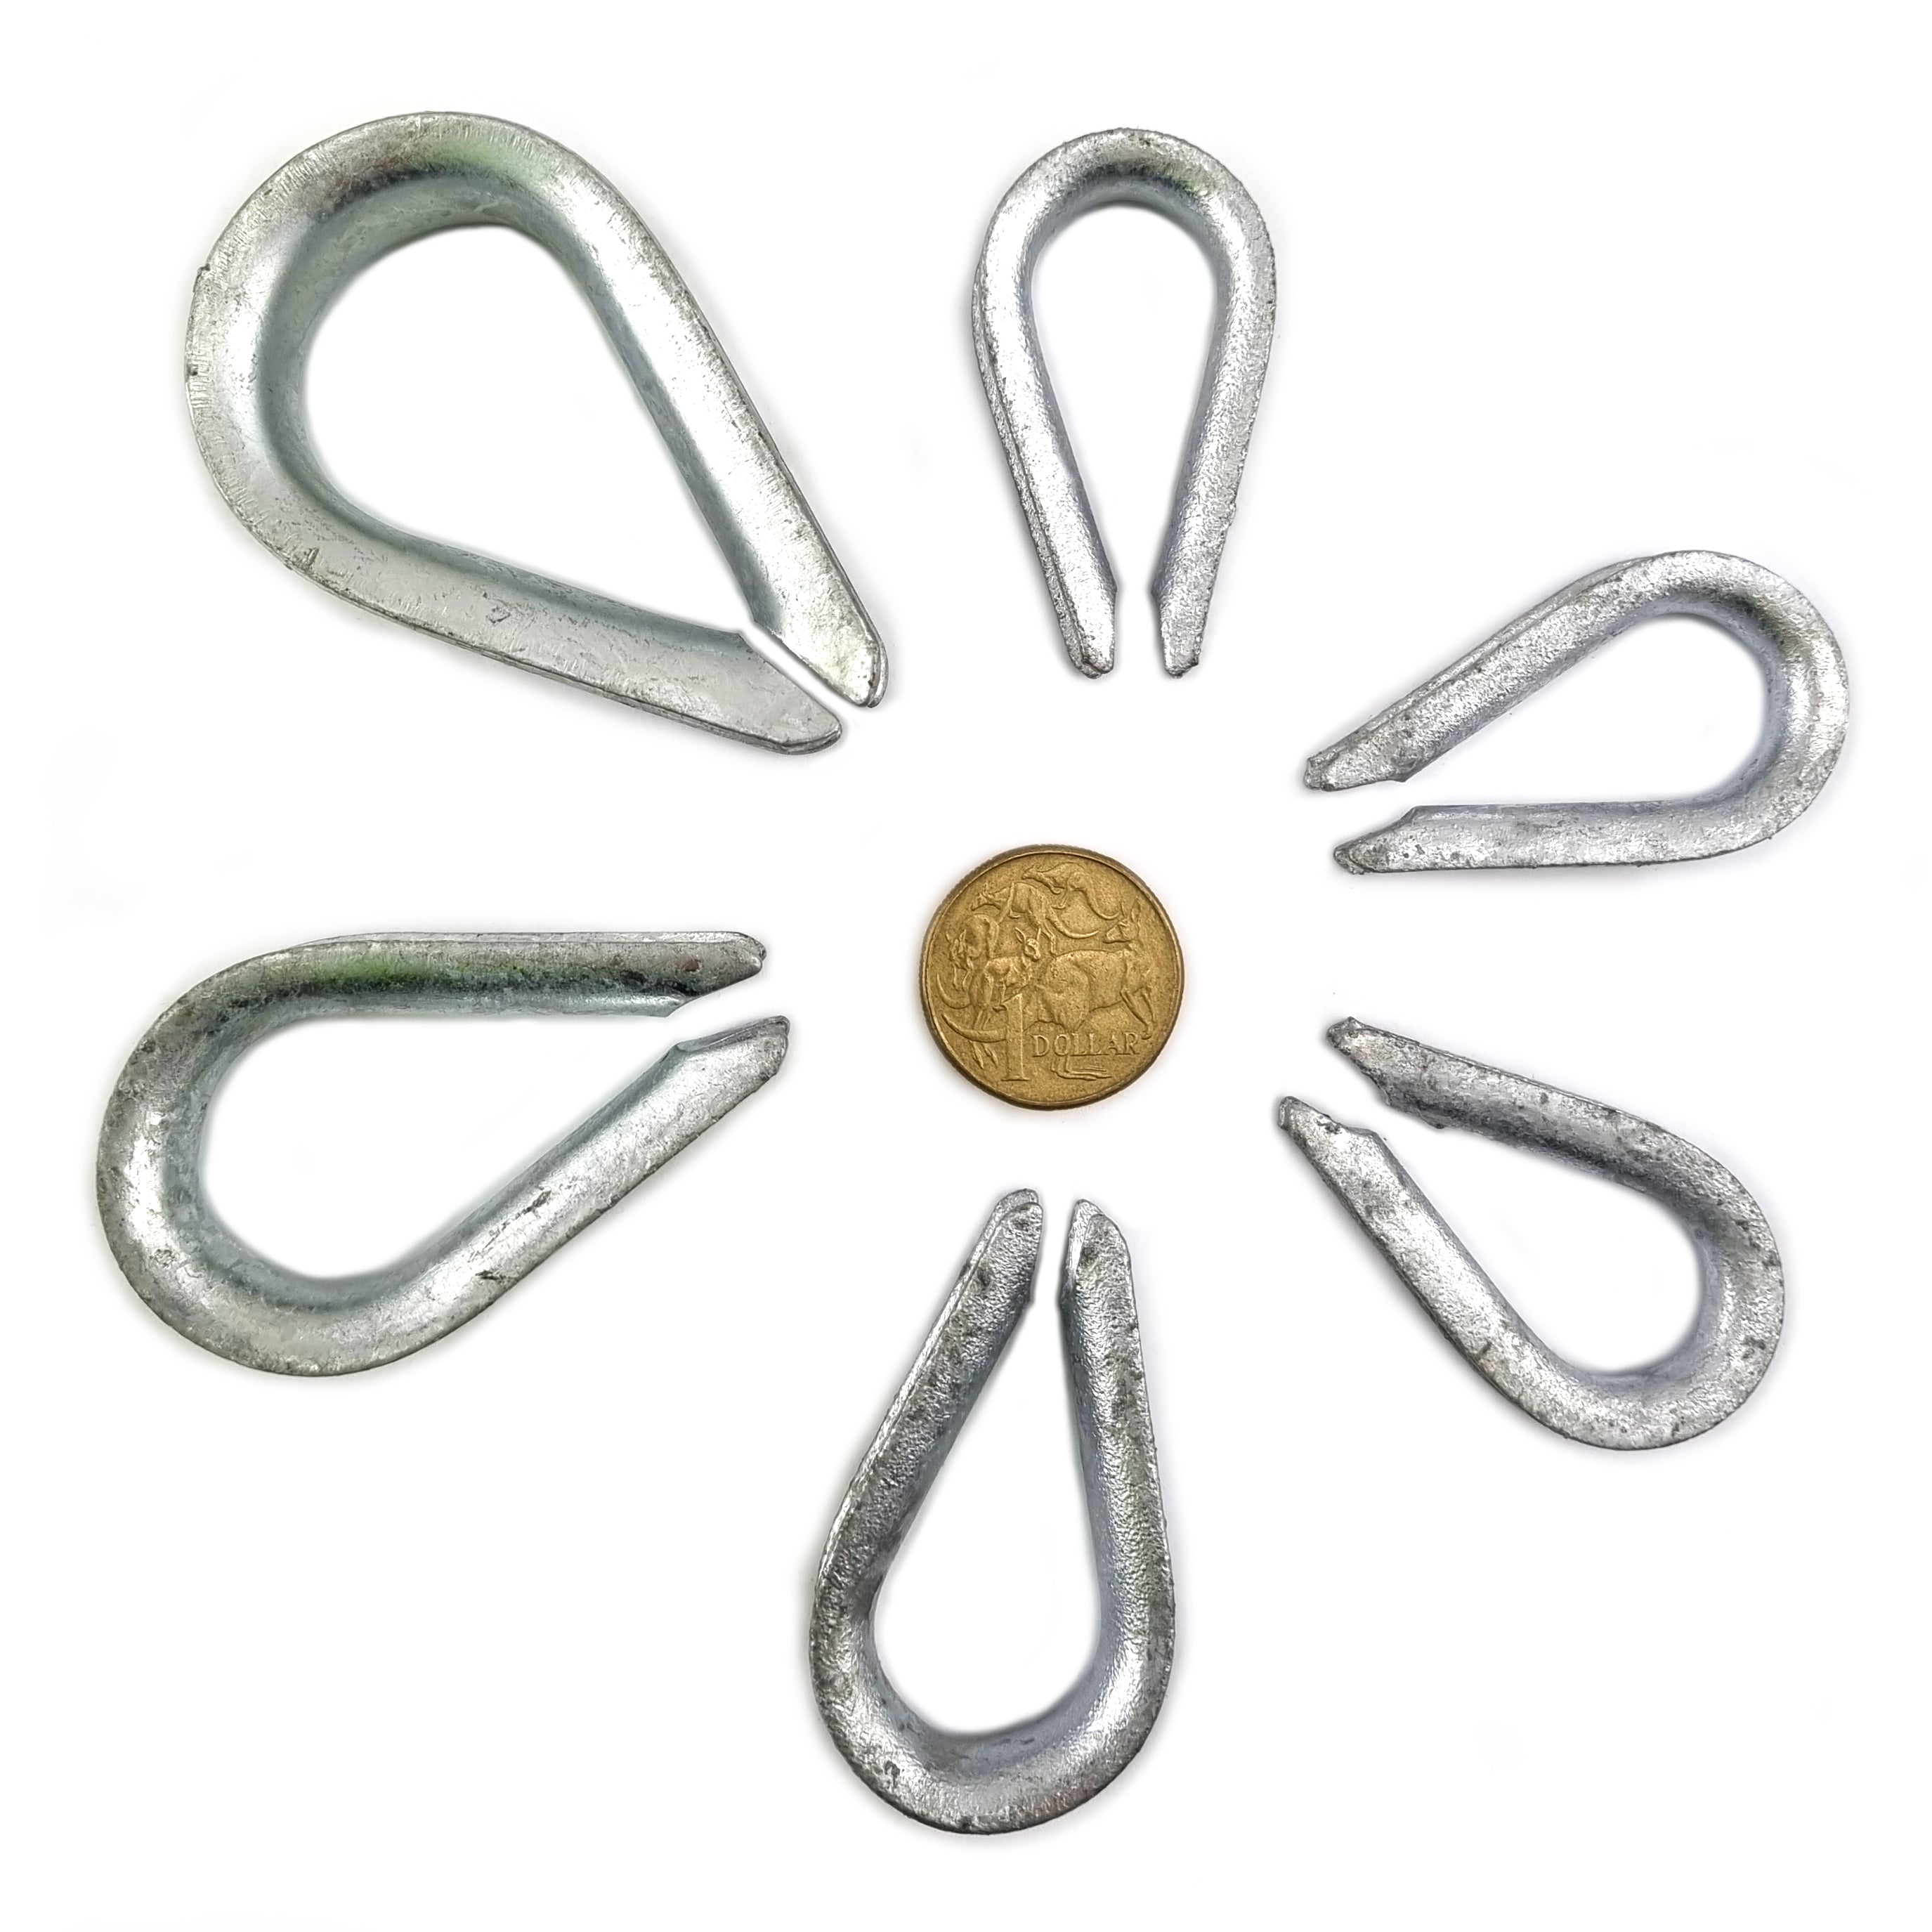 Galvanised thimbles are available in sizes: 3mm, 4mm, 5mm, 6mm, 8mm, 10mm and 12mm. Shop Chain.com.au